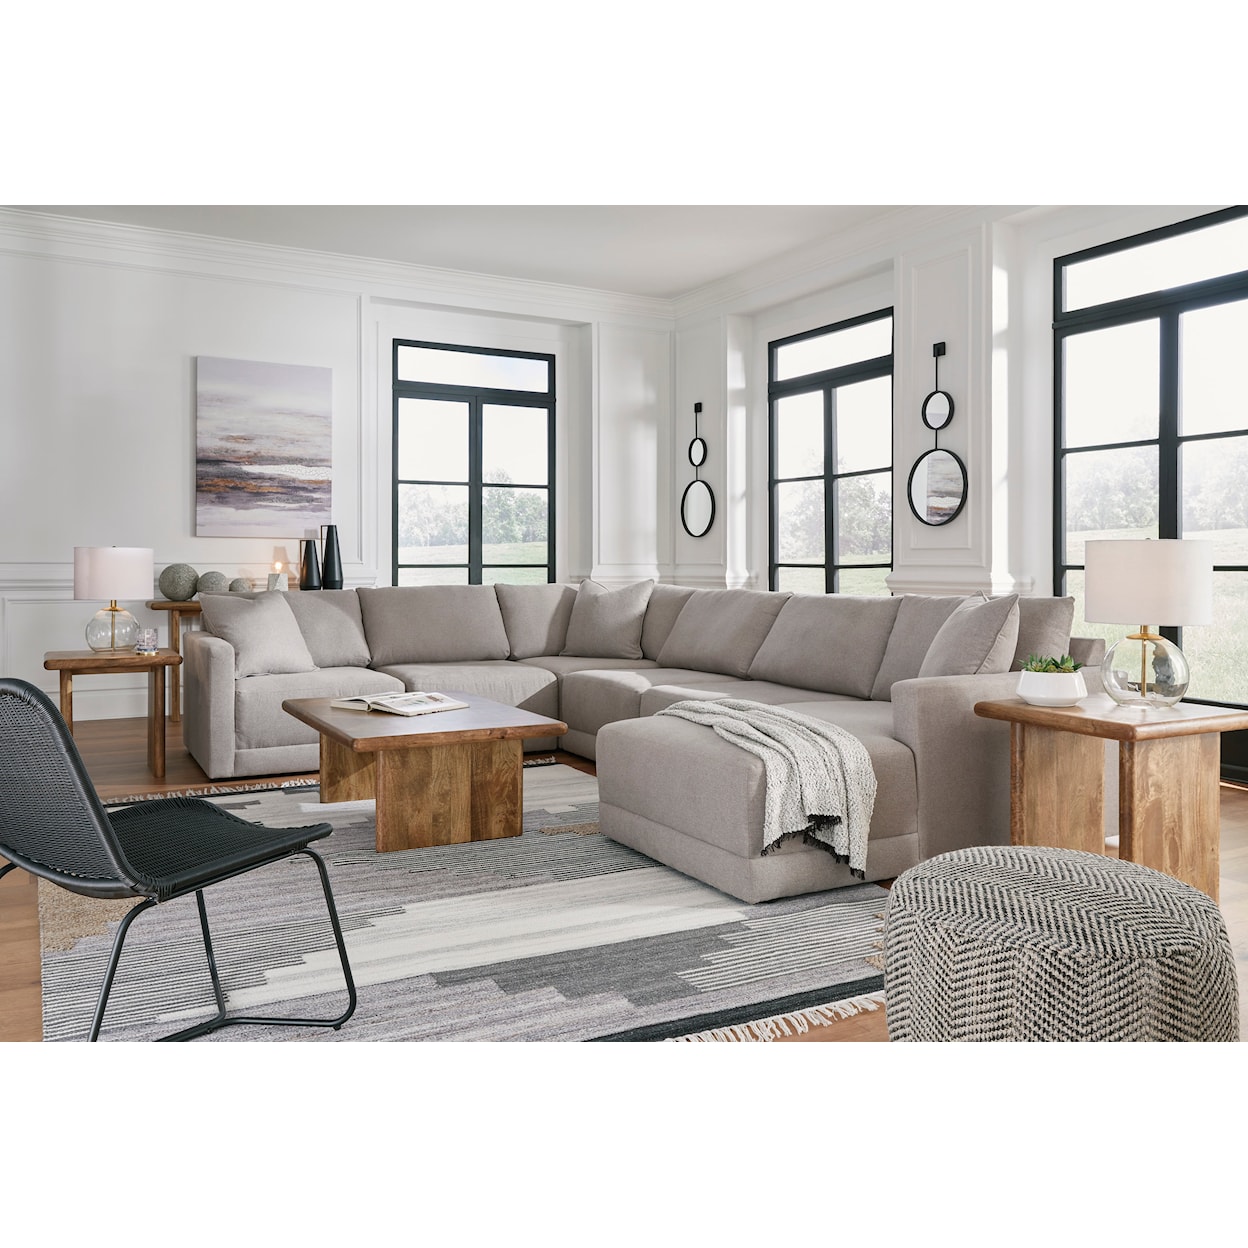 Benchcraft Katany 6-Piece Sectional with Chaise